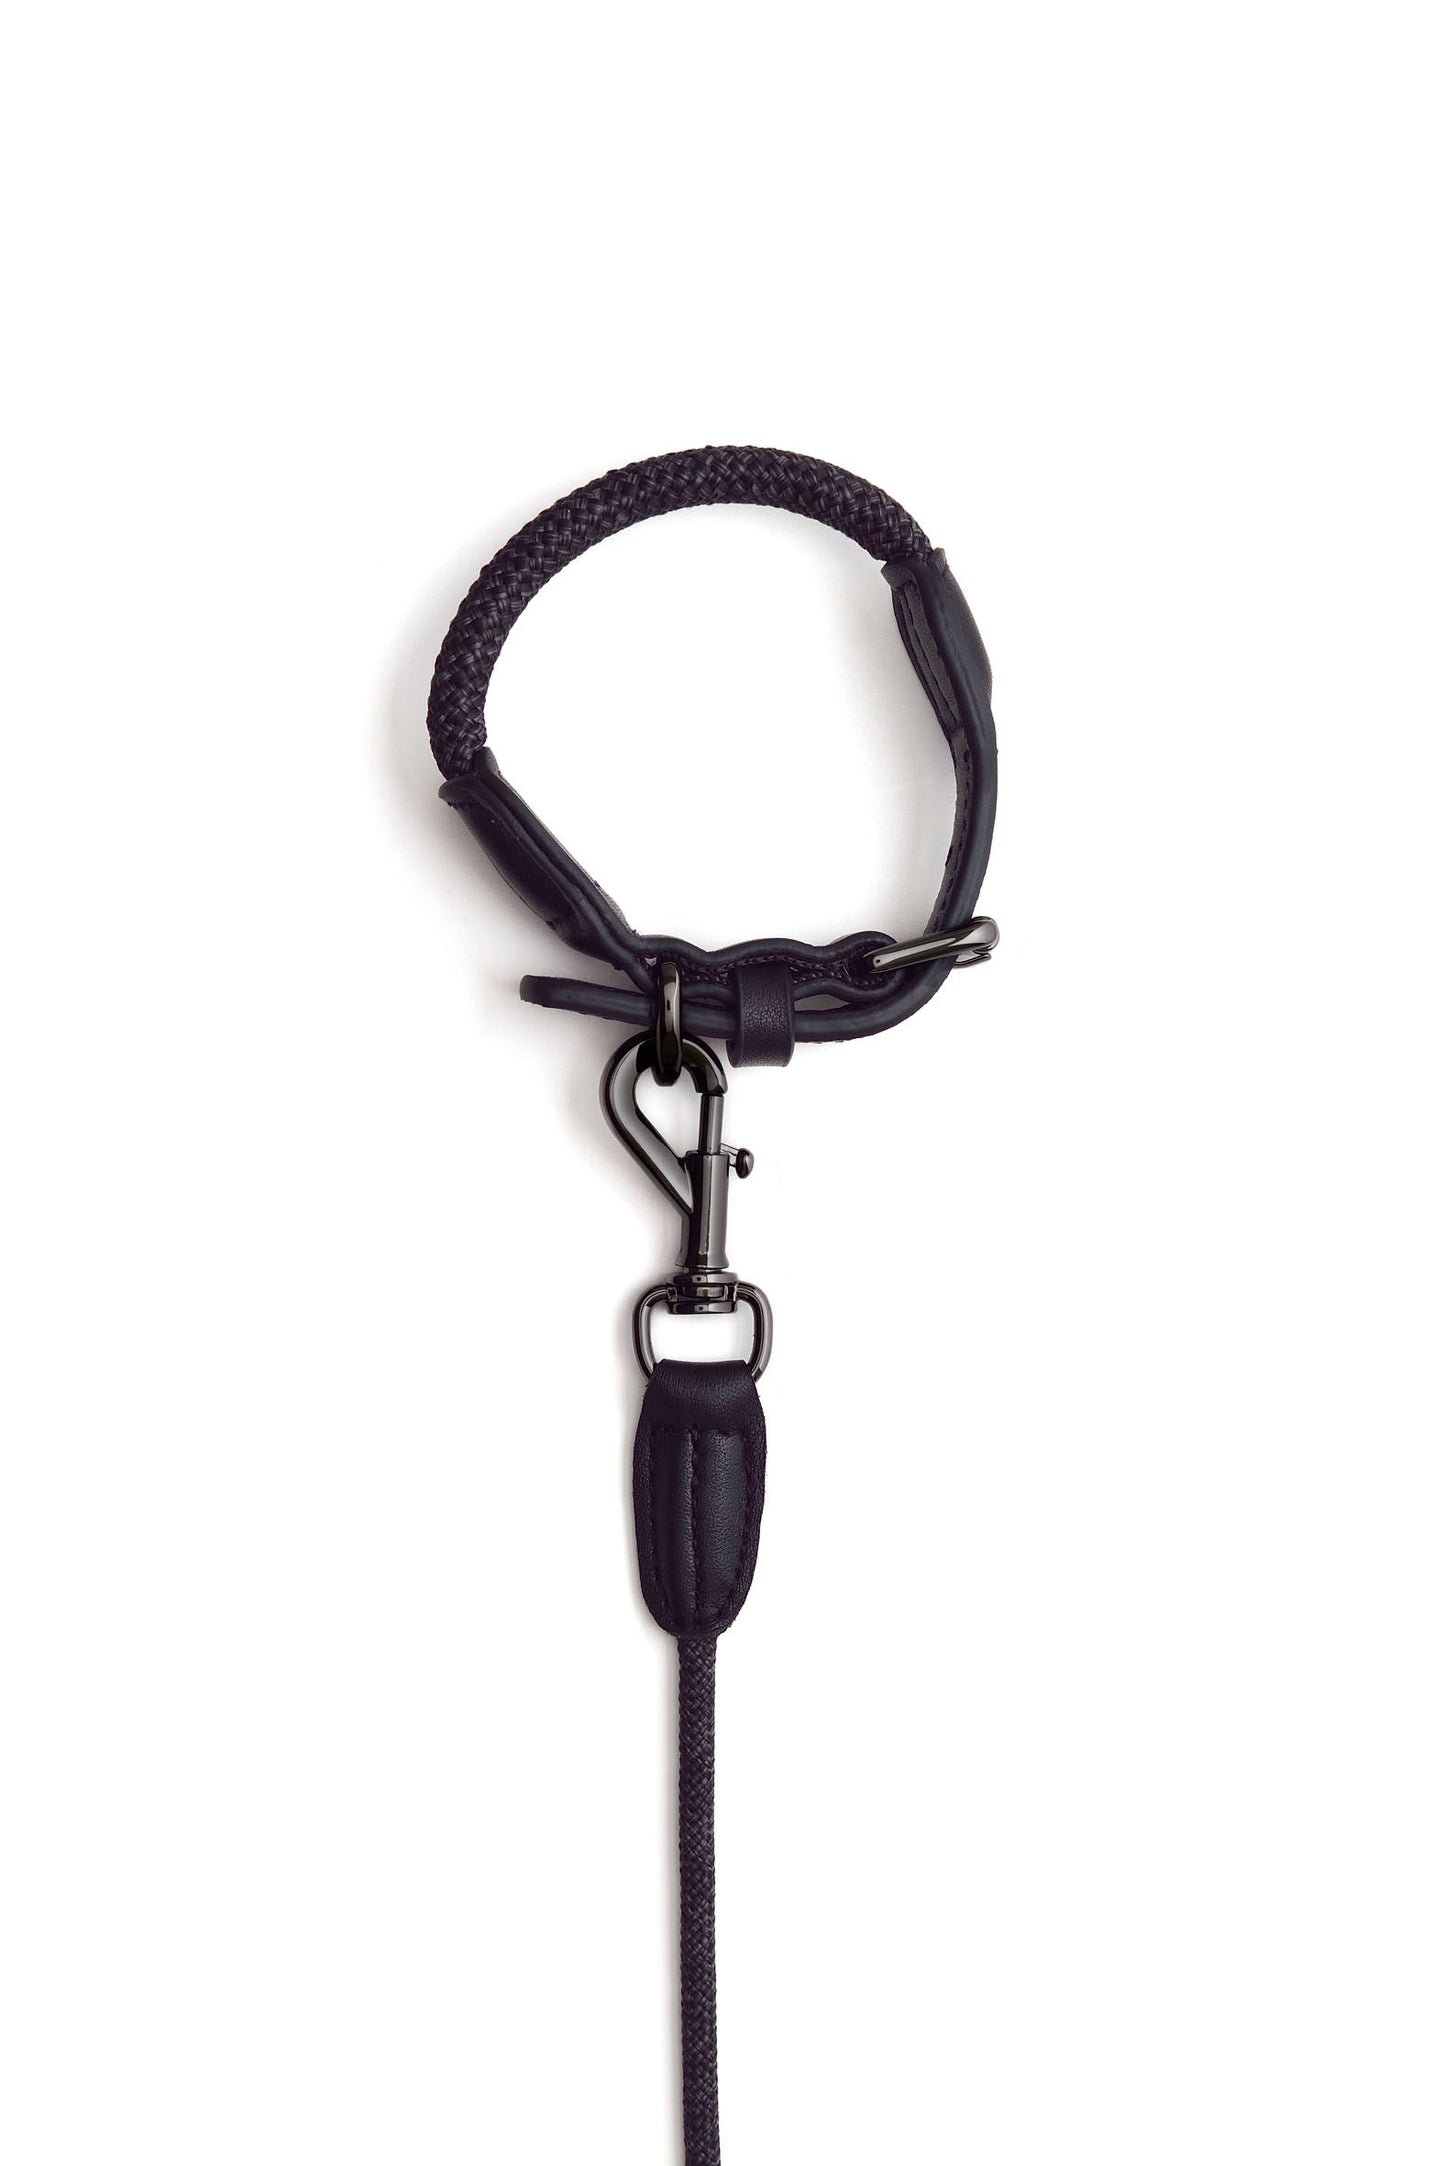 【High5dogs】Leader Leash Charcoal